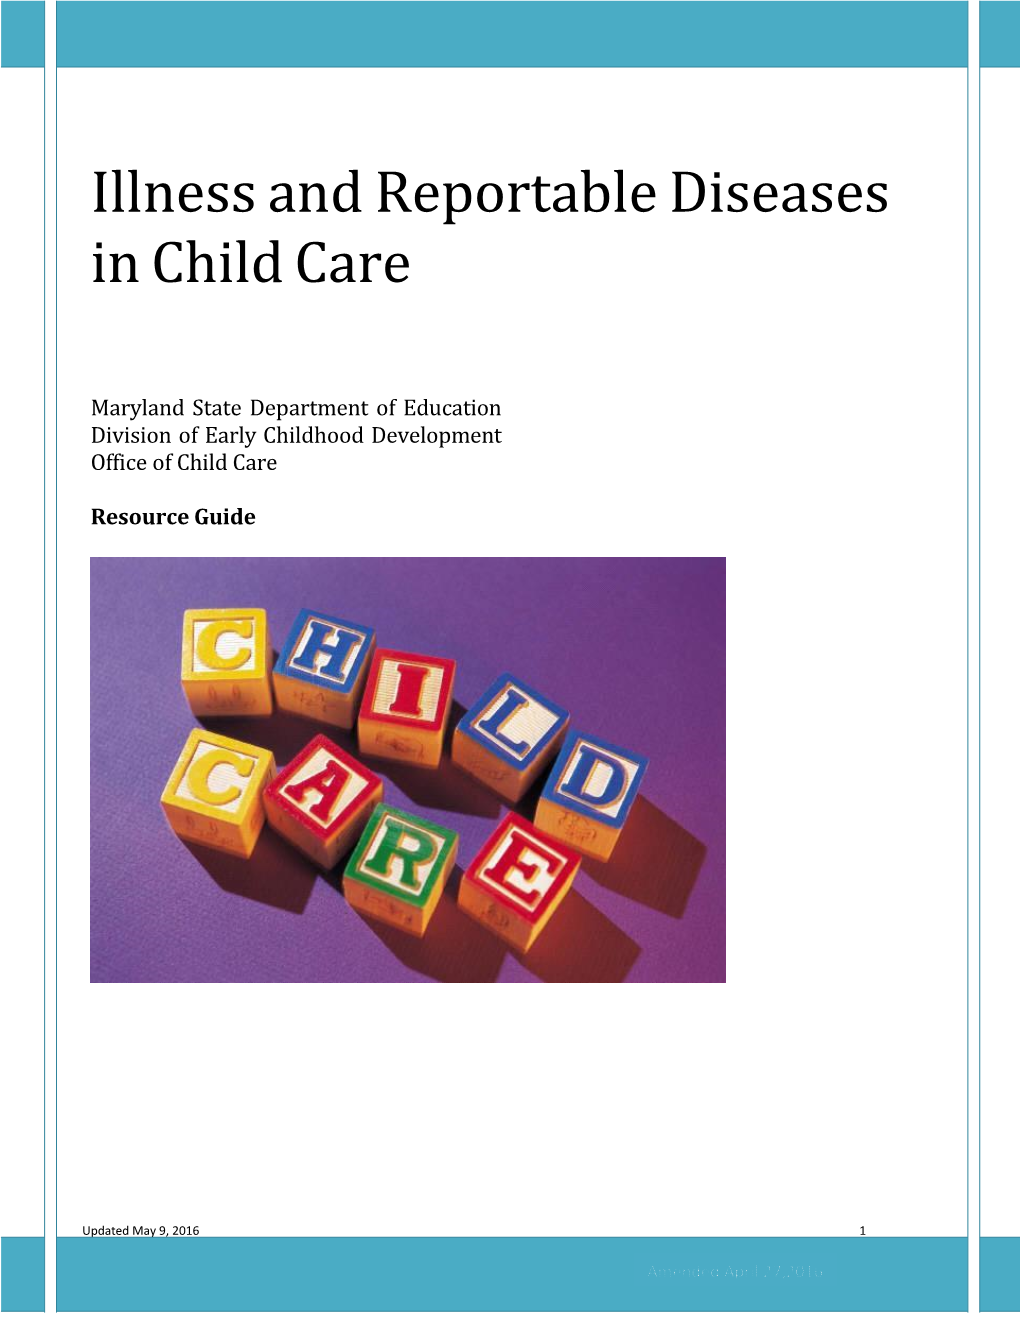 Illness and Reportable Diseases in Child Care